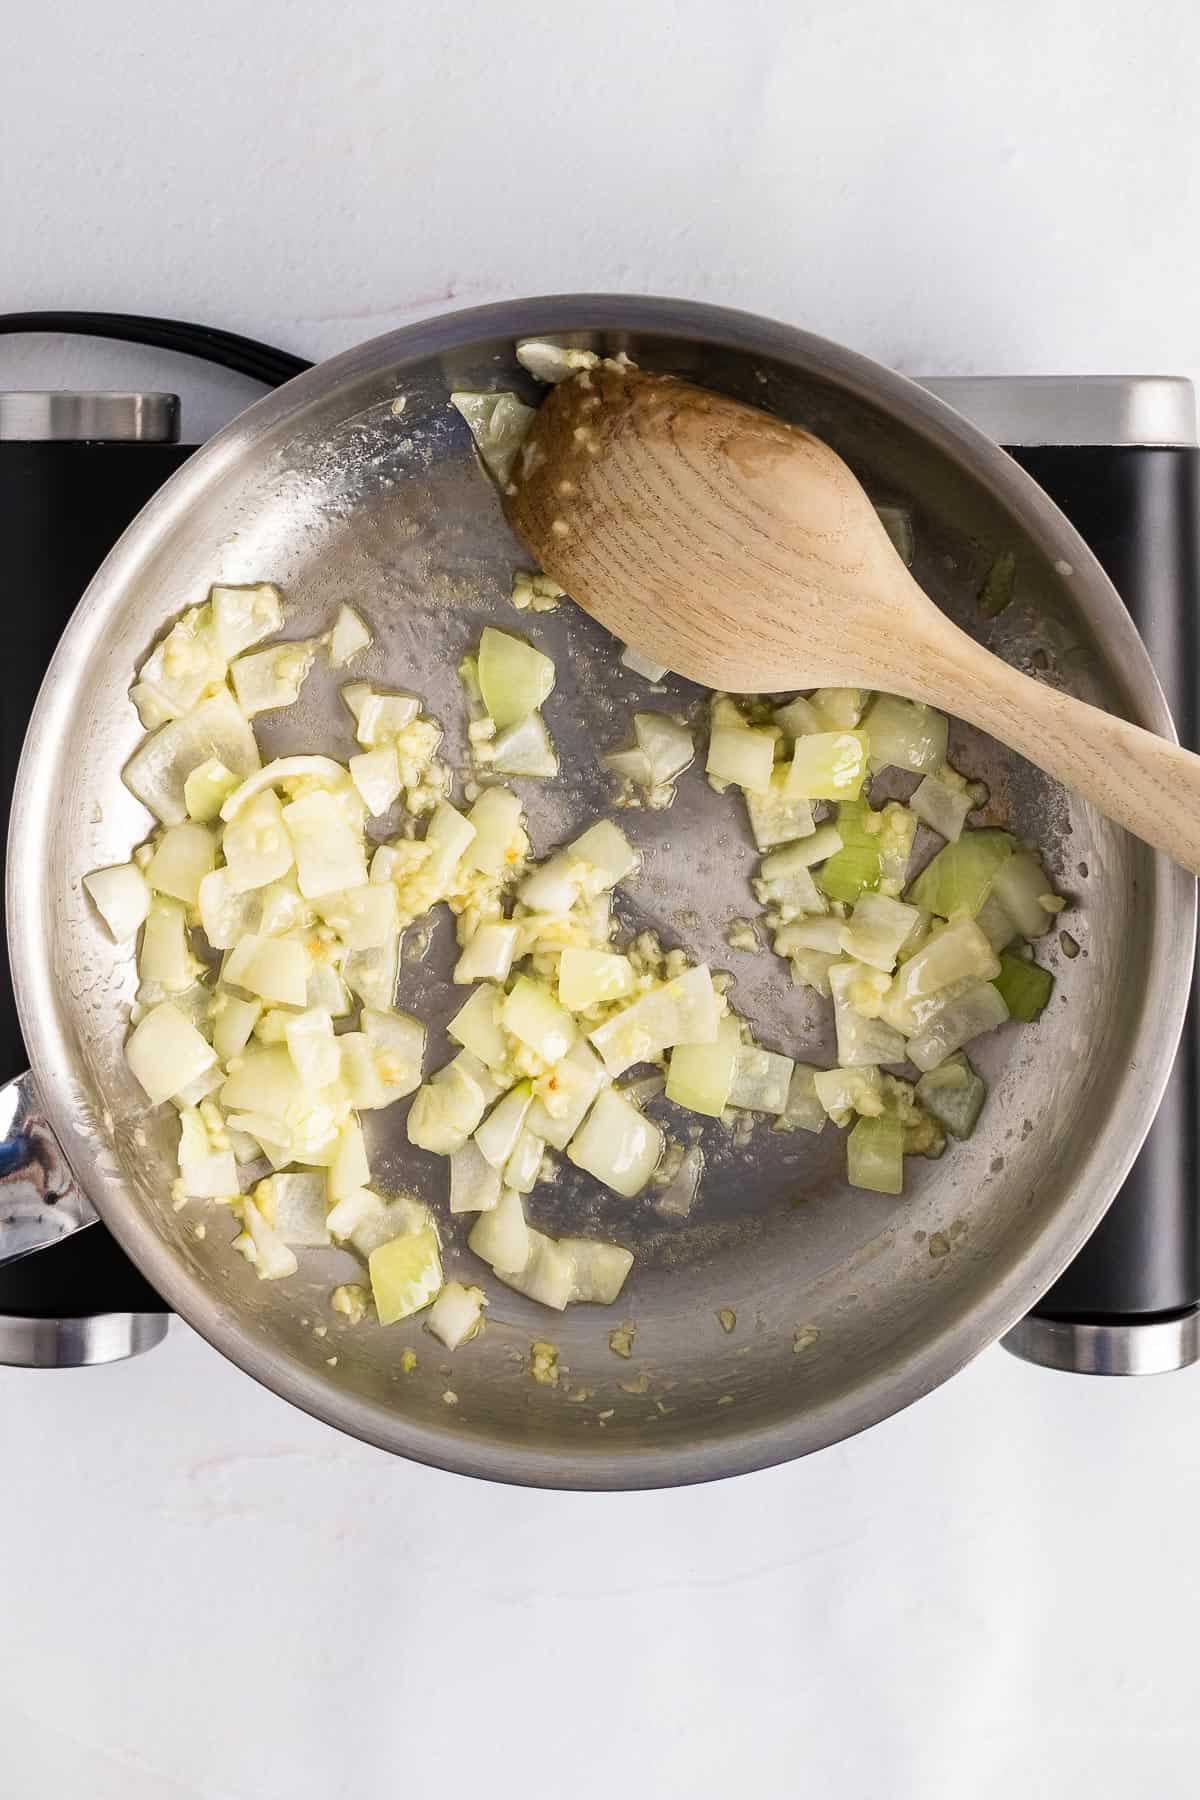 skillet with onions and garlic sautéing in butter